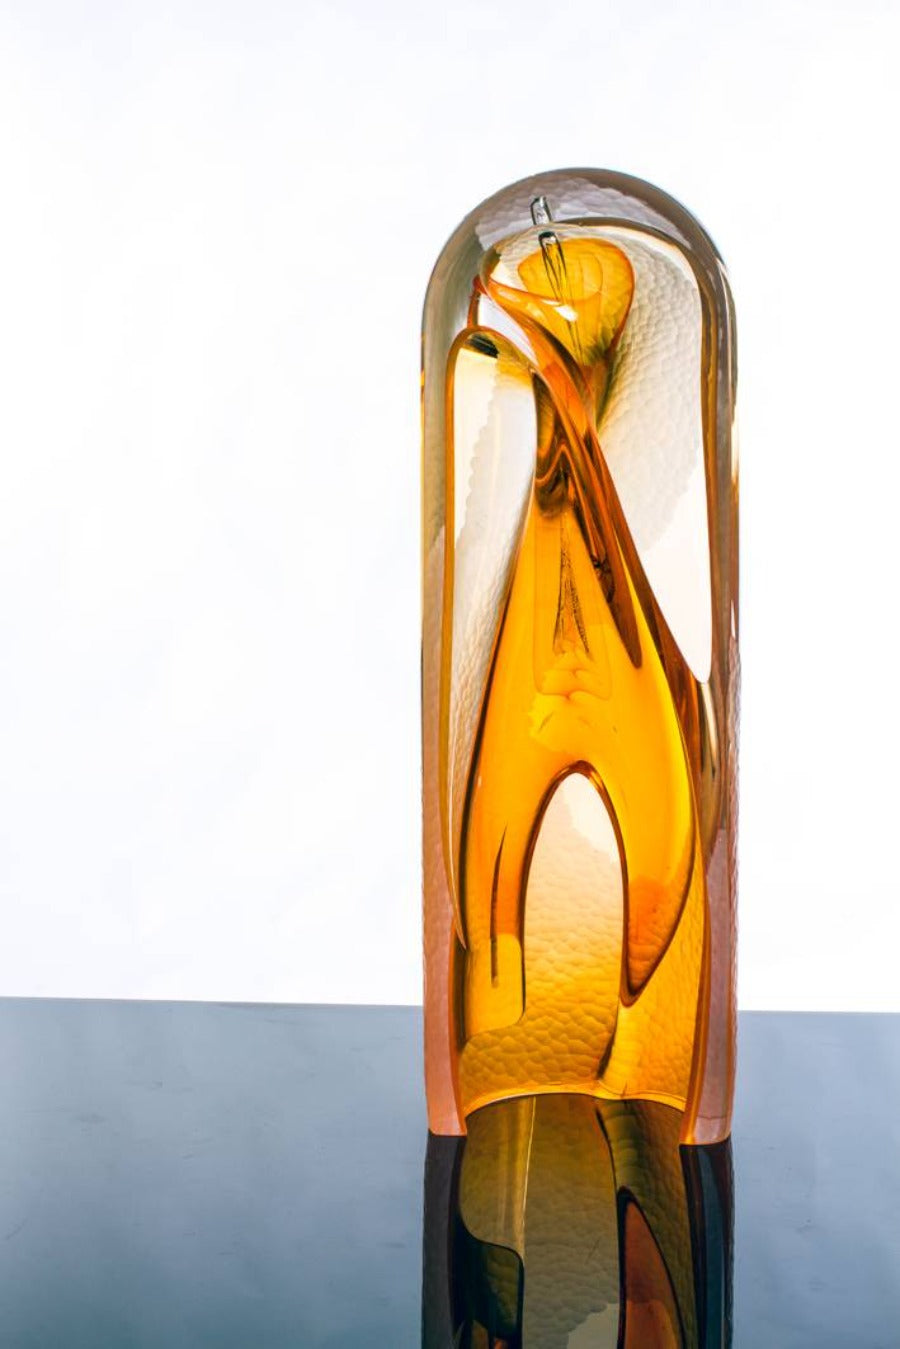 Orange Faceted Helix Sculpture by Phil Vickery, an original glass sculpture with orange colours | Original handmade art for sale at The Biscuit Factory Newcastle.